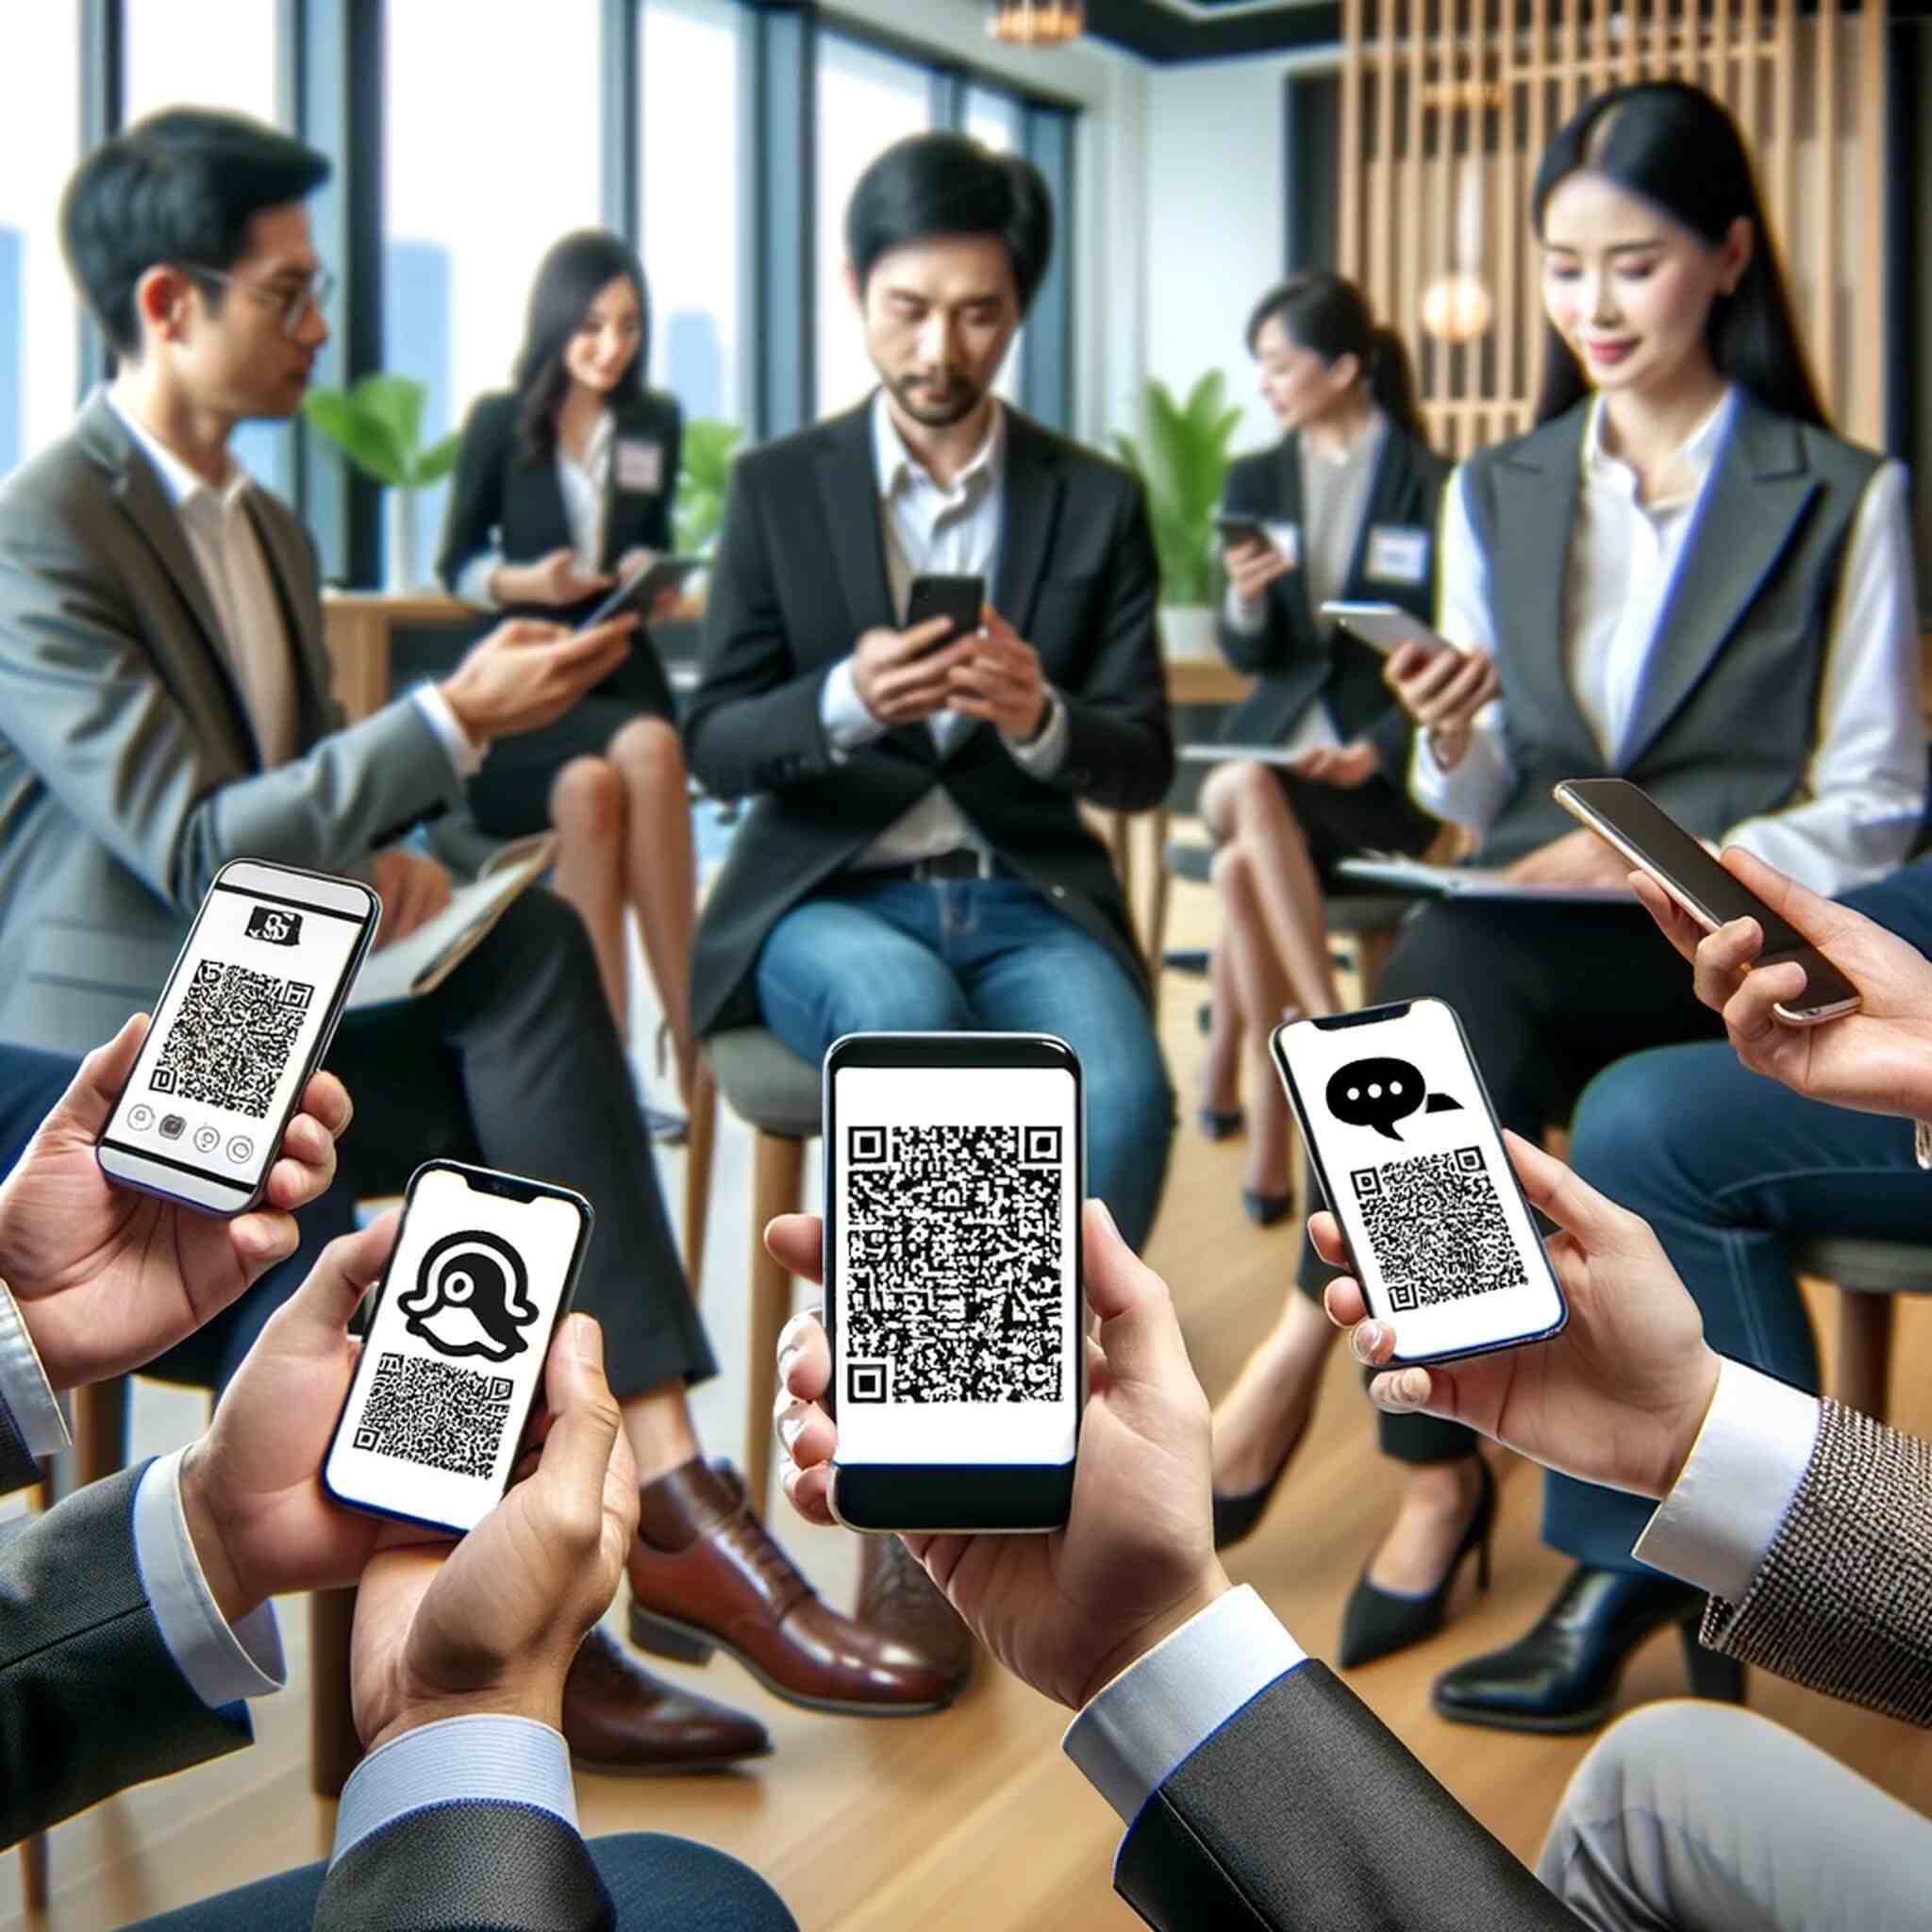 A group of people sharing their WeChat QR codes and networking